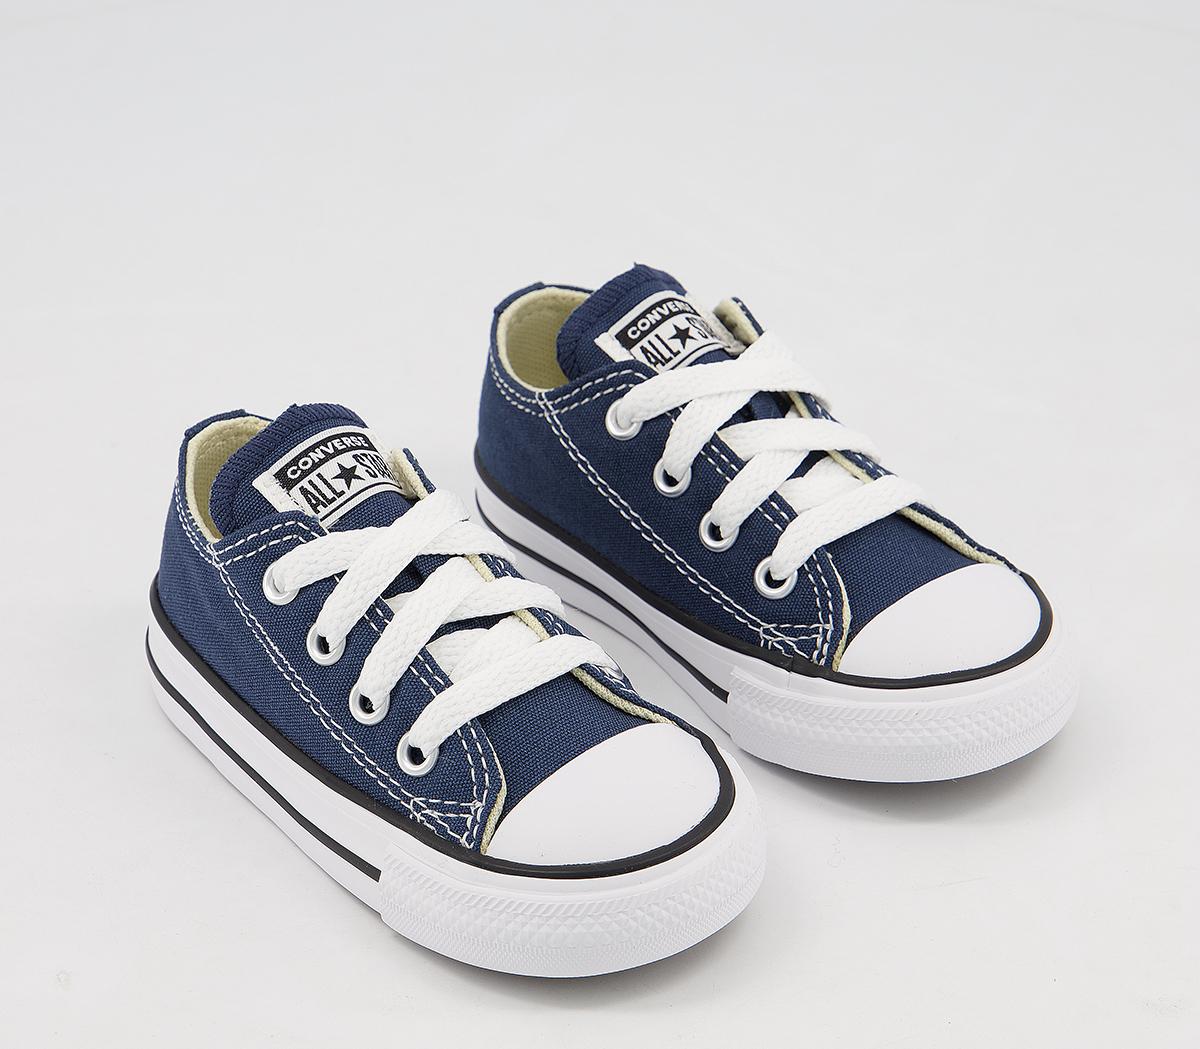 Kids Converse Baby Boys All Star Low Infant Shoes In Navy Blue And White, 10 Youth